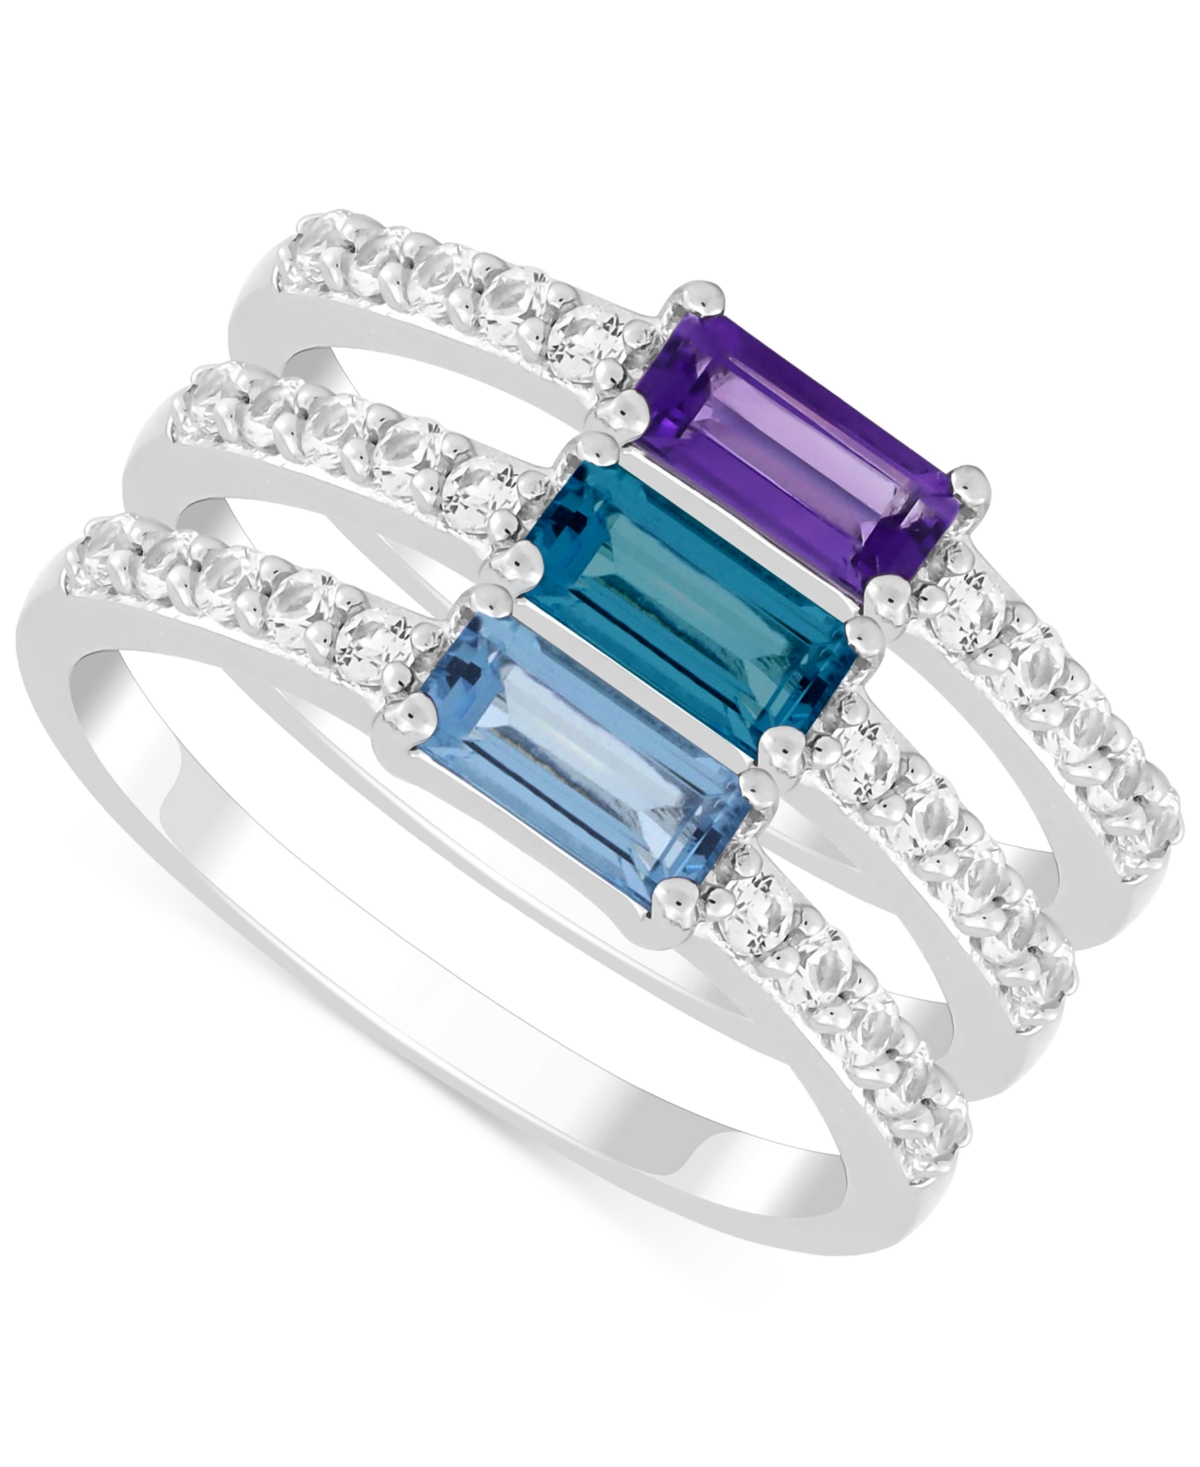 3-Pc. Set Multi-Gemstone (1-1/4 ct. t.w.) & Lab-Grown White Sapphire (5/8 ct. t.w.) Stack Rings in Sterling Silver - Multi Gemstone